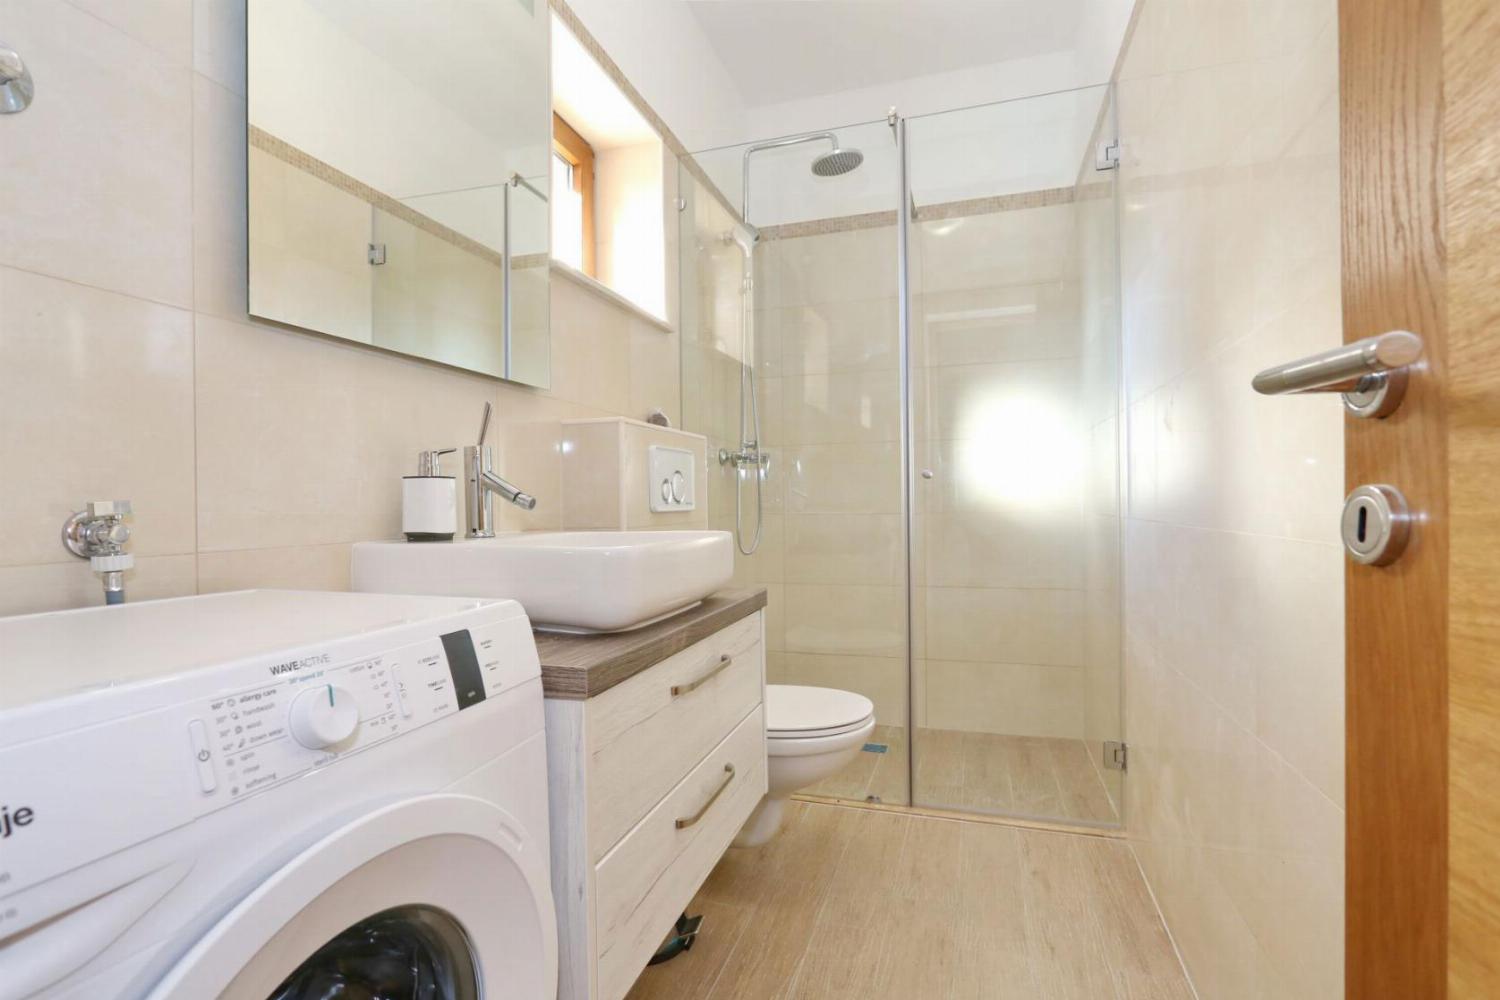 En suite bathroom with shower and WC